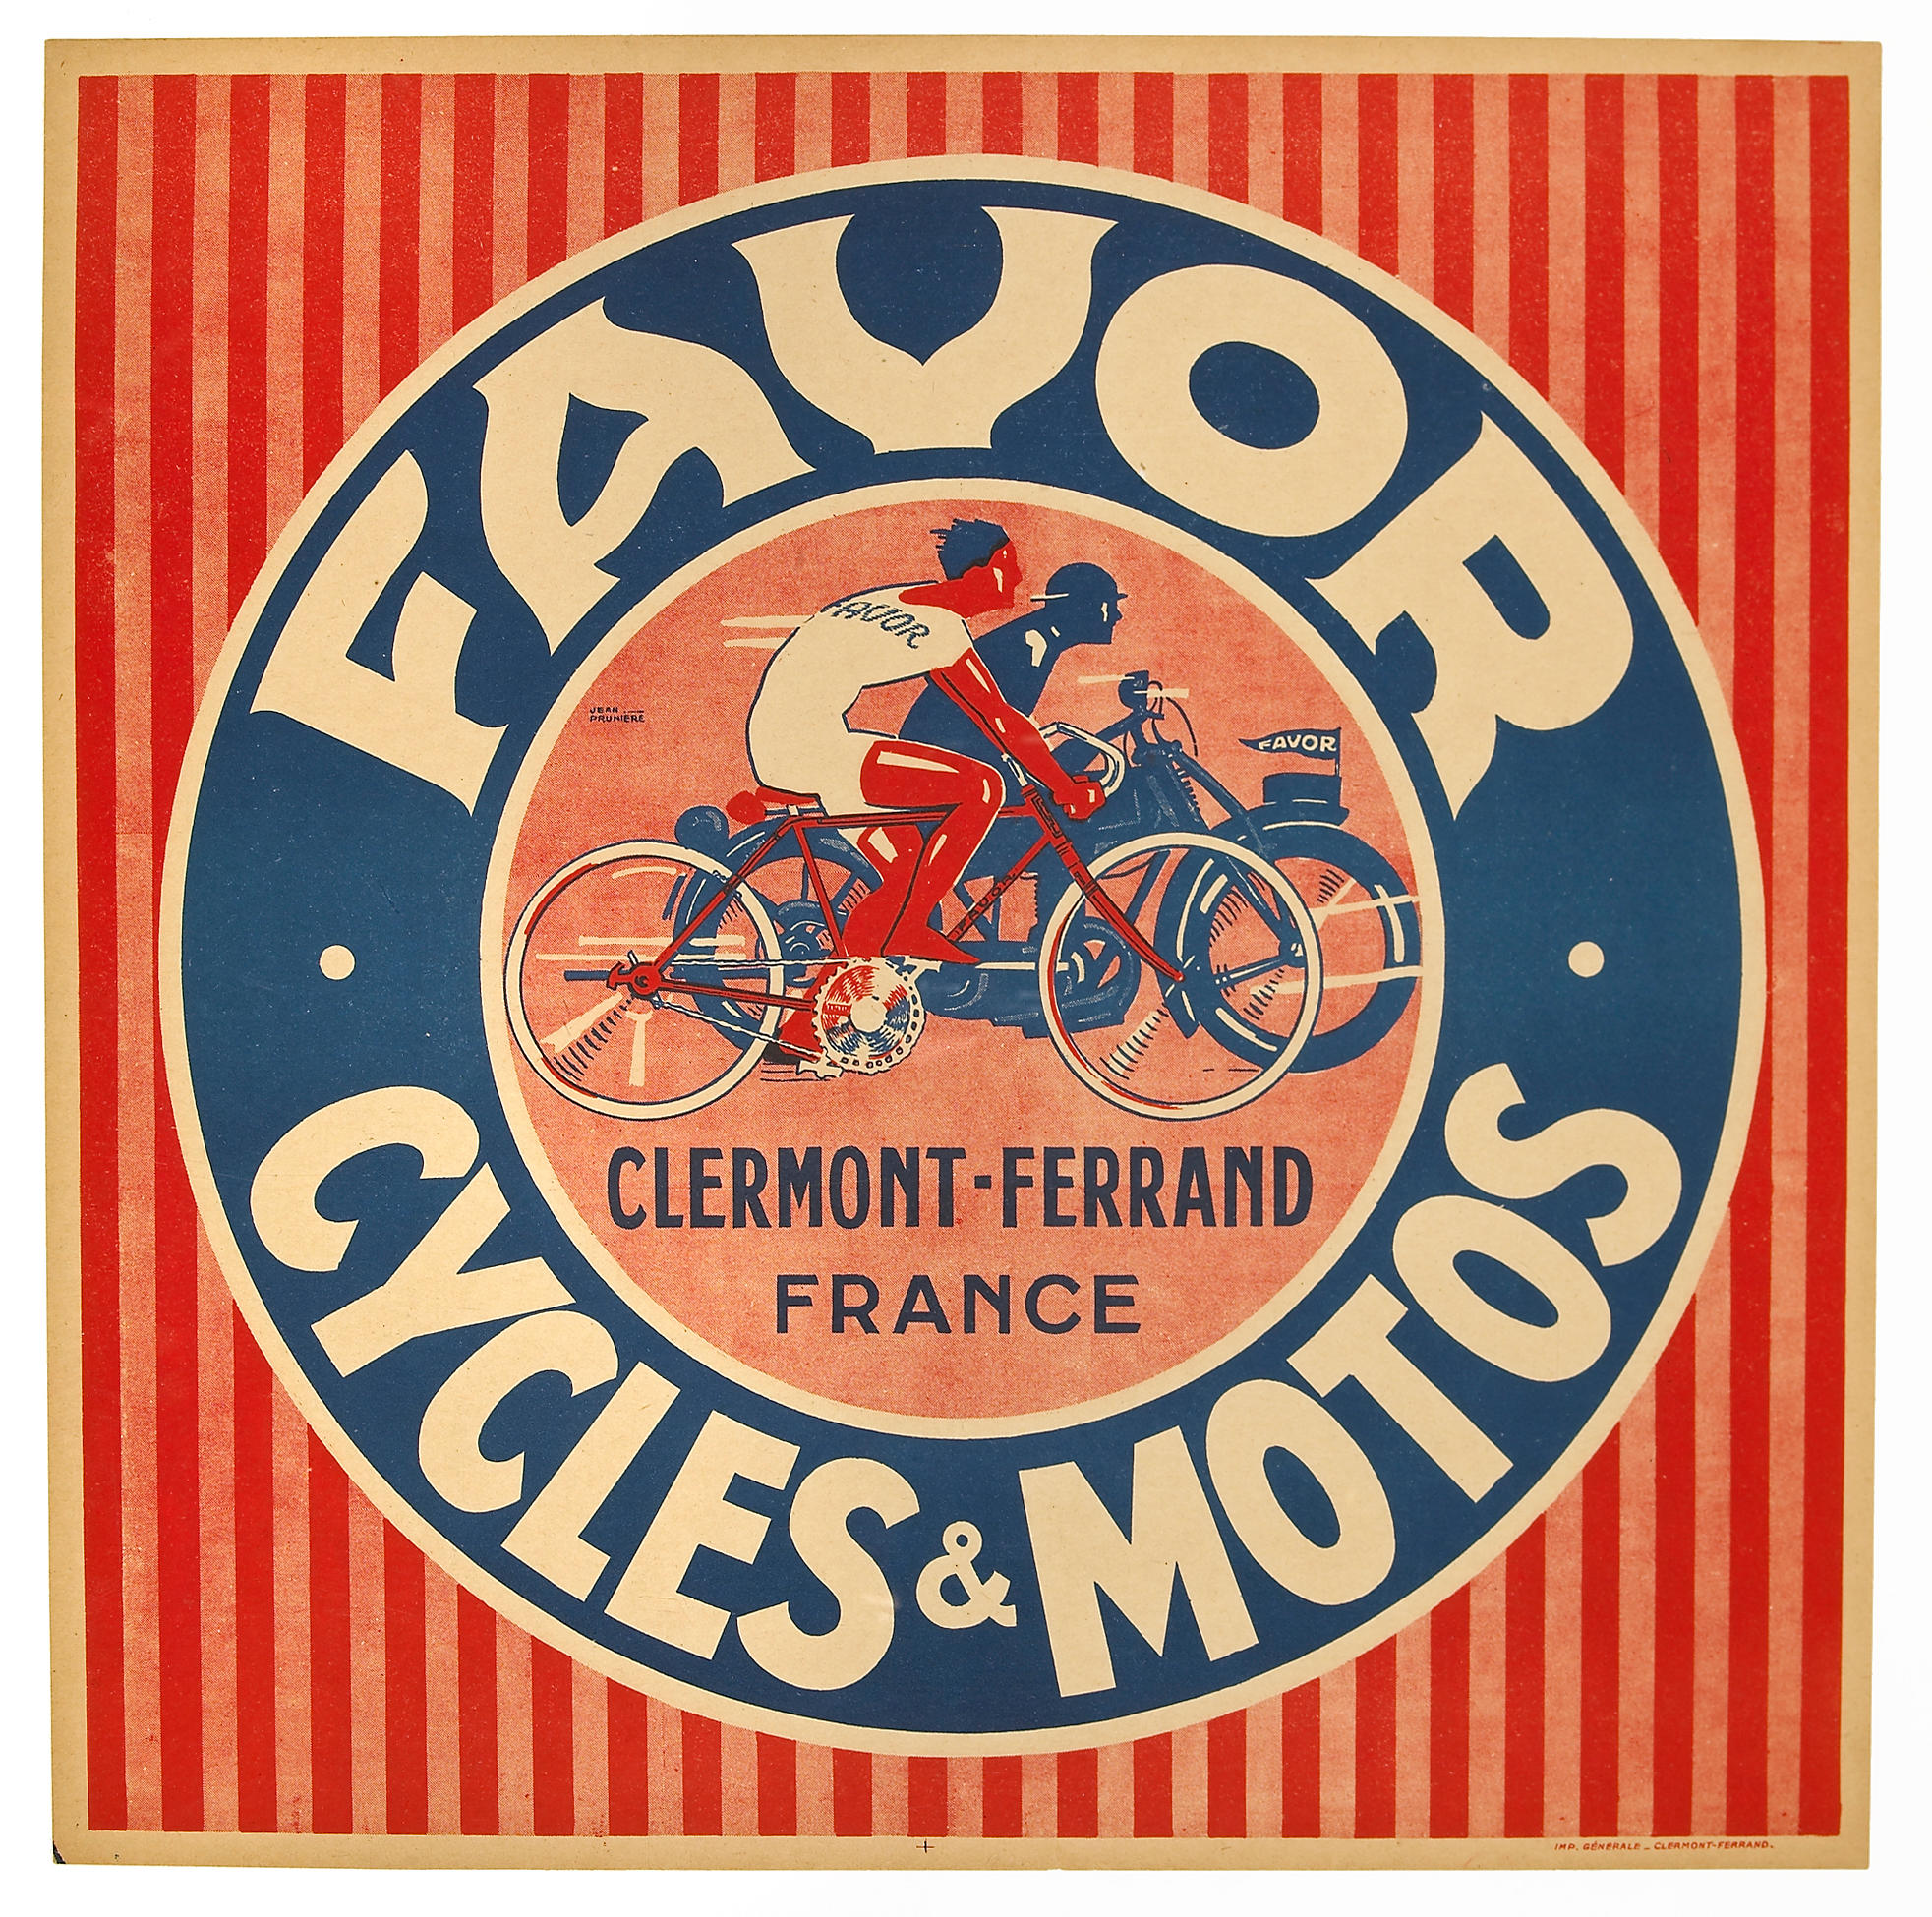 A Favor Cyles & Motos advertising poster, French, 1920s,